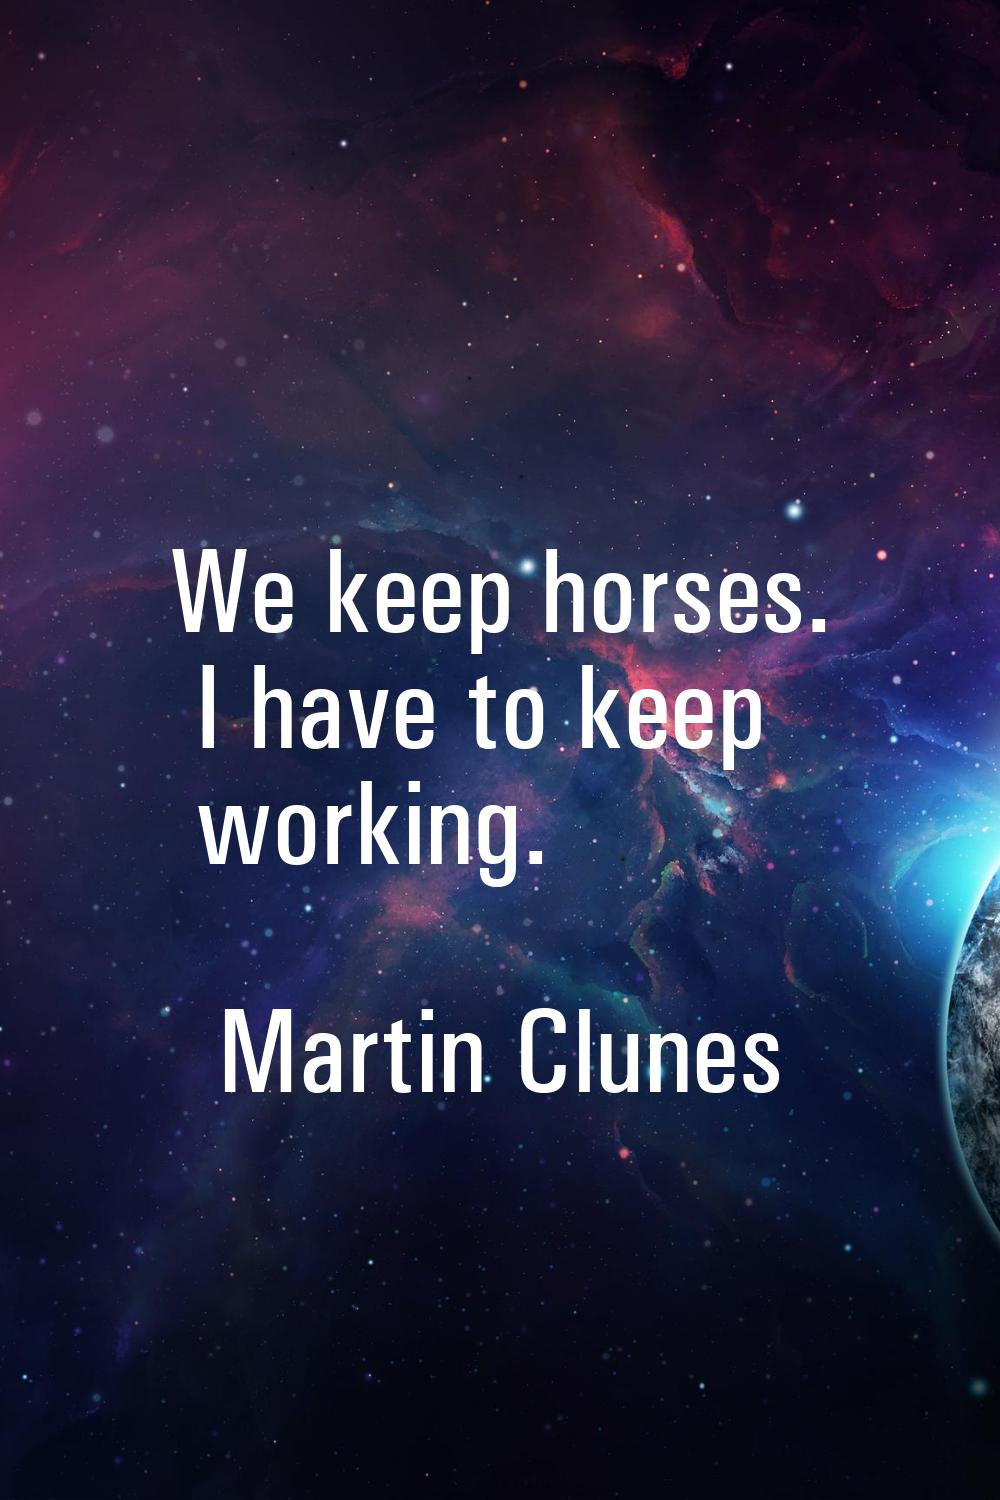 We keep horses. I have to keep working.